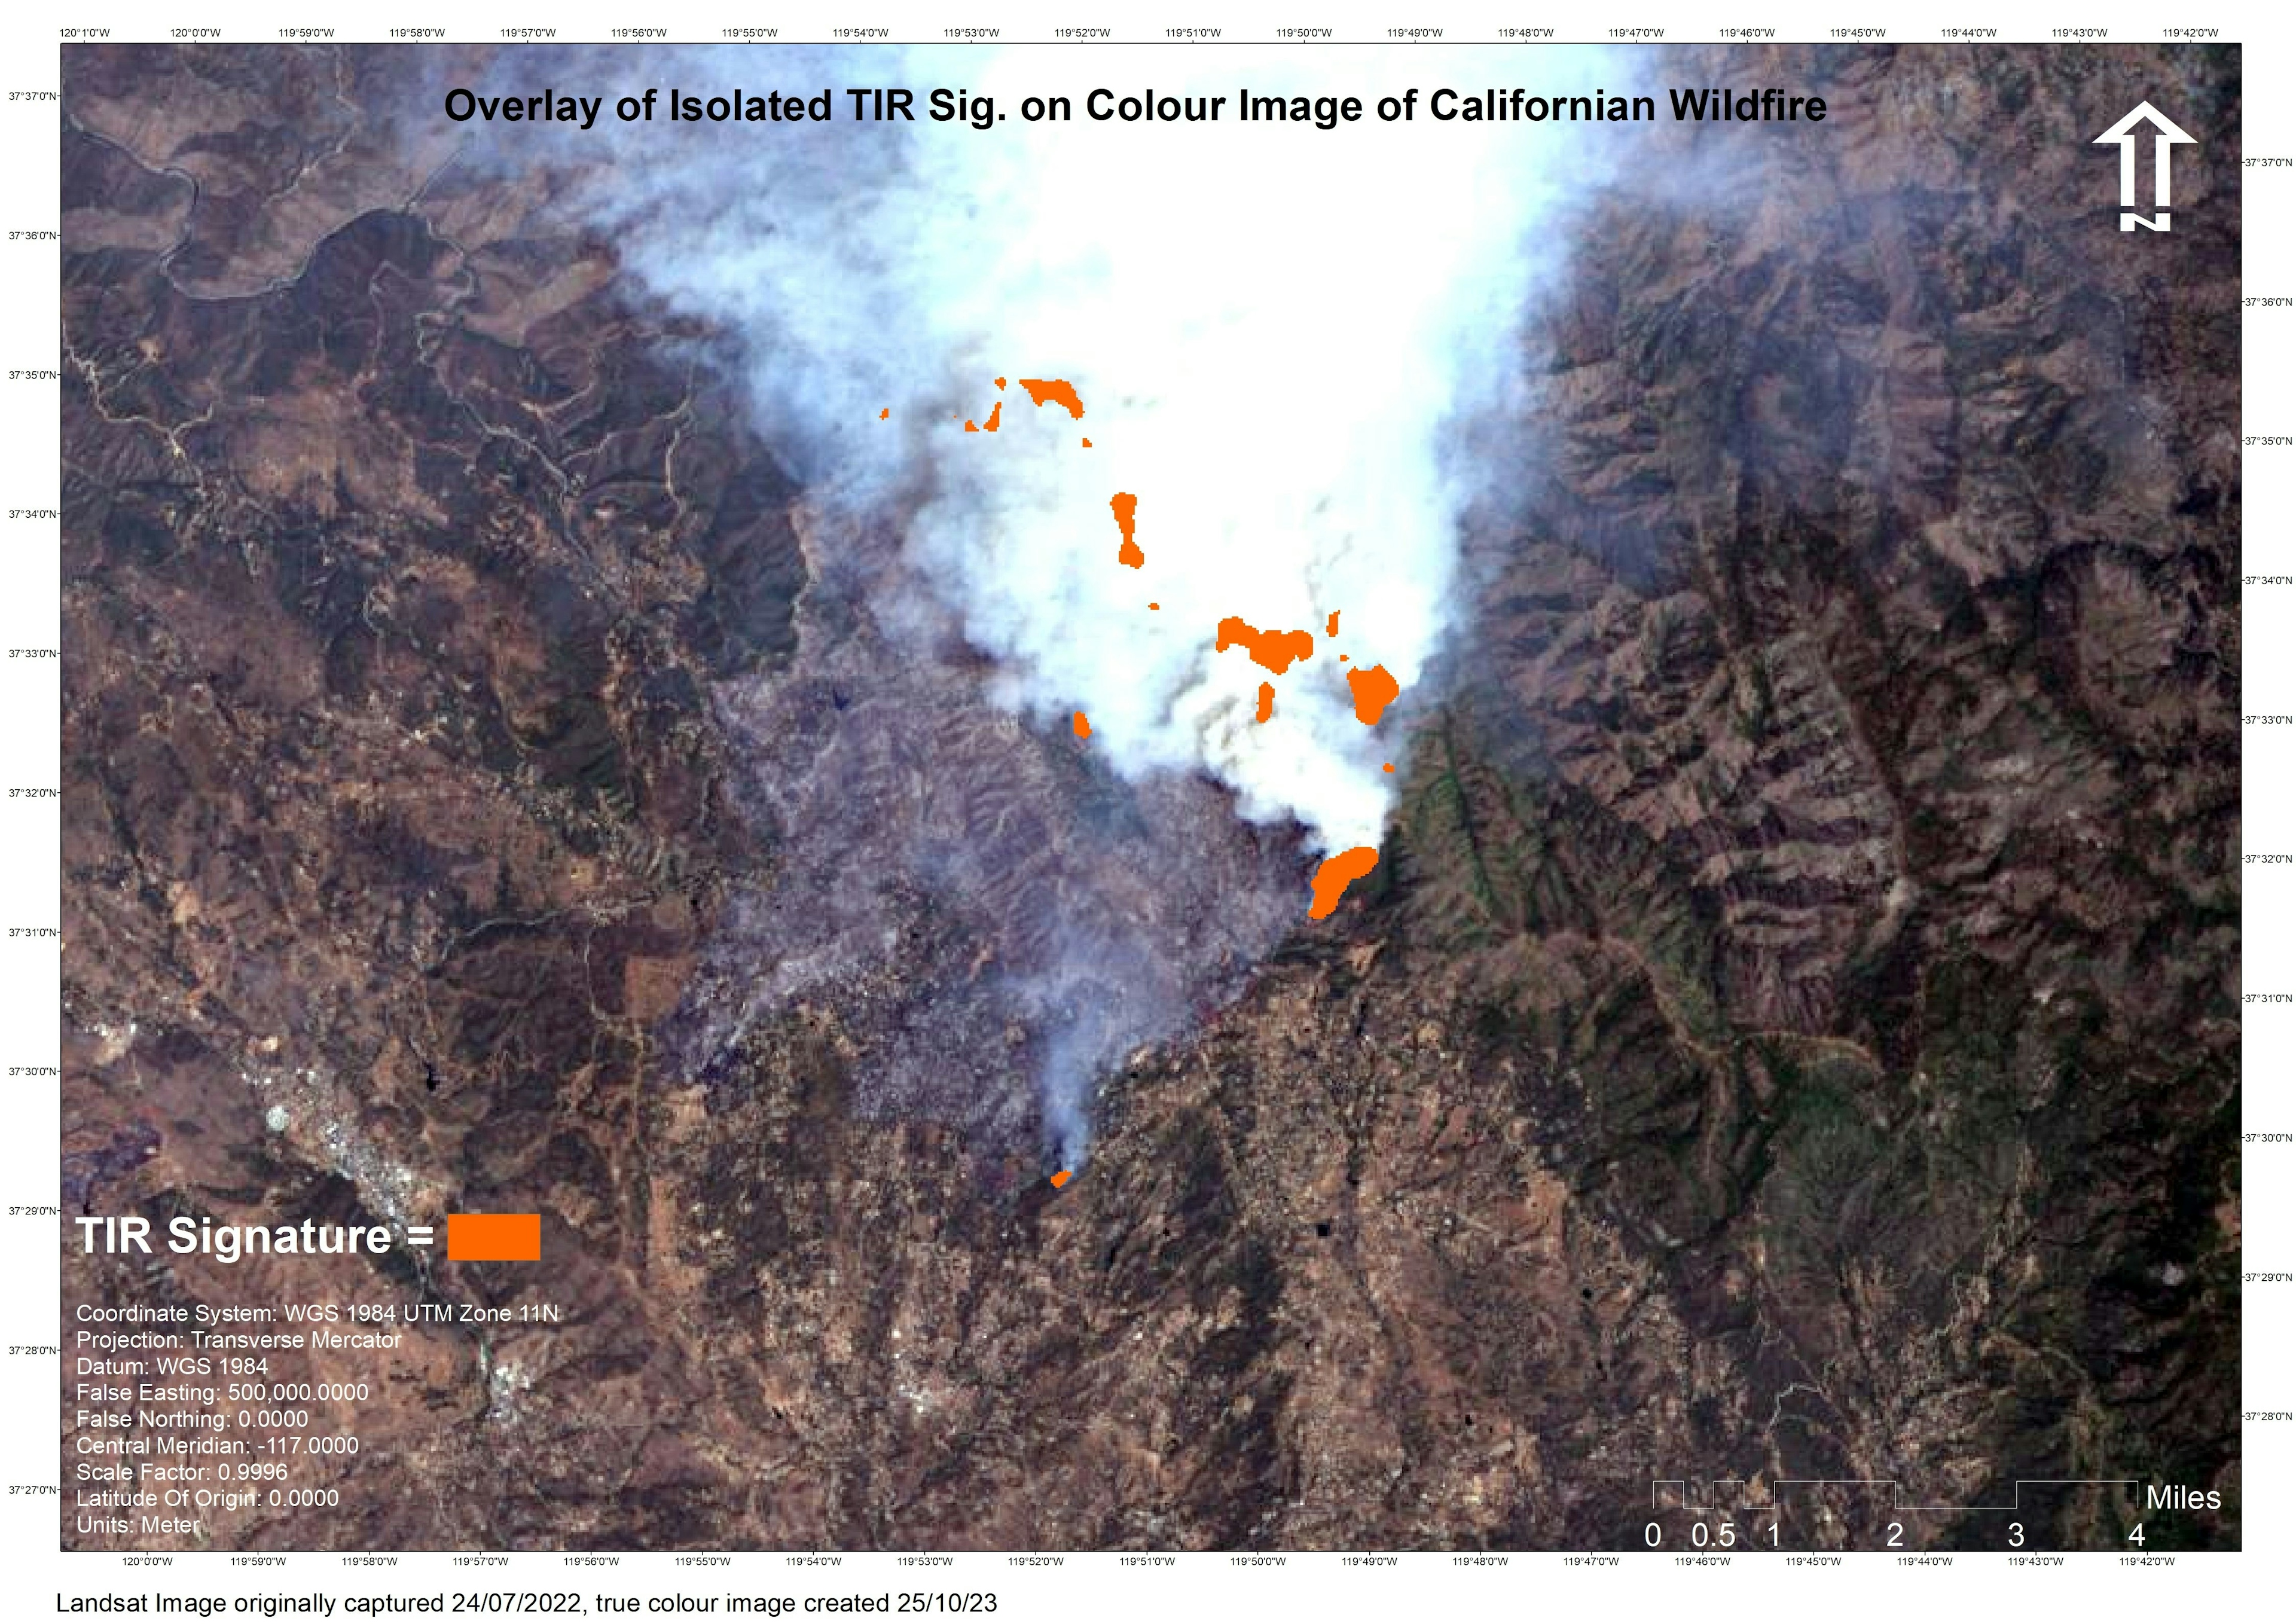 Determining Areas of Active Wildfire 